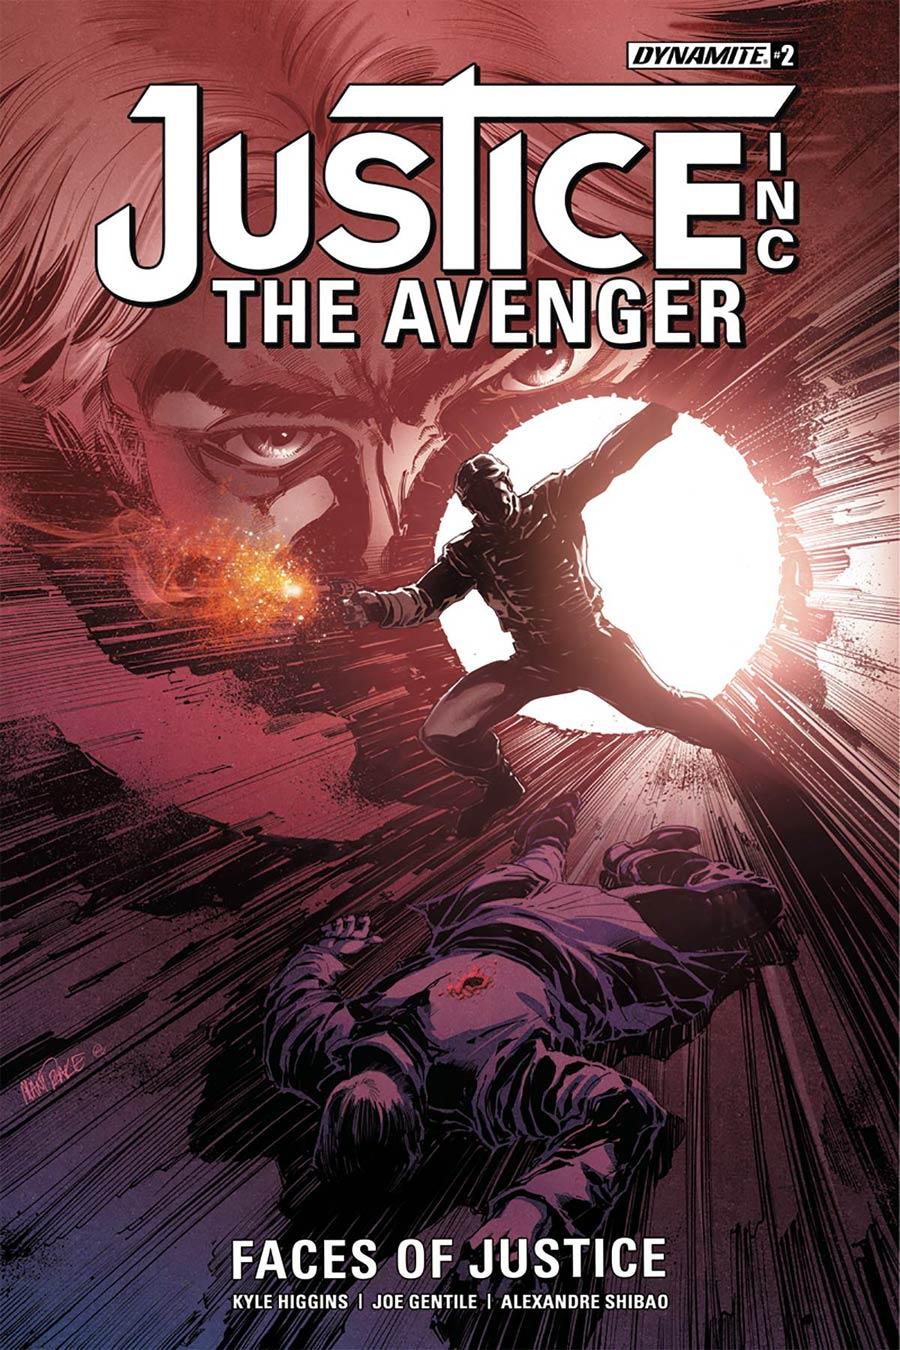 Justice Inc The Avenger Faces Of Justice Vol. 1 #2